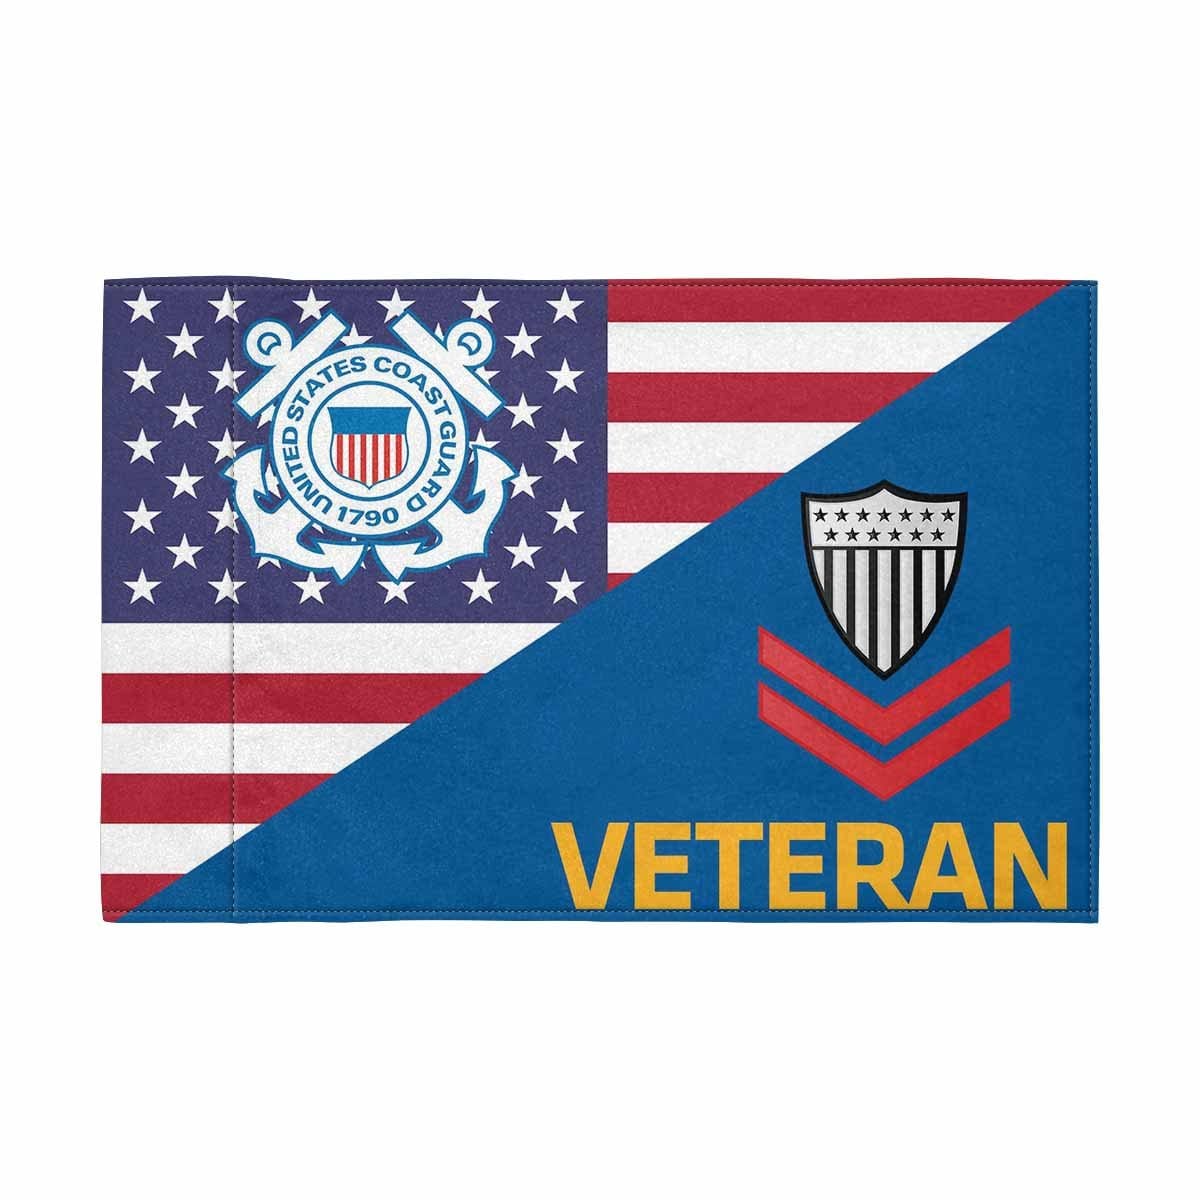 US Coast Guard E-5 Collar Device Veteran Motorcycle Flag 9" x 6" Twin-Side Printing D01-MotorcycleFlag-USCG-Veterans Nation